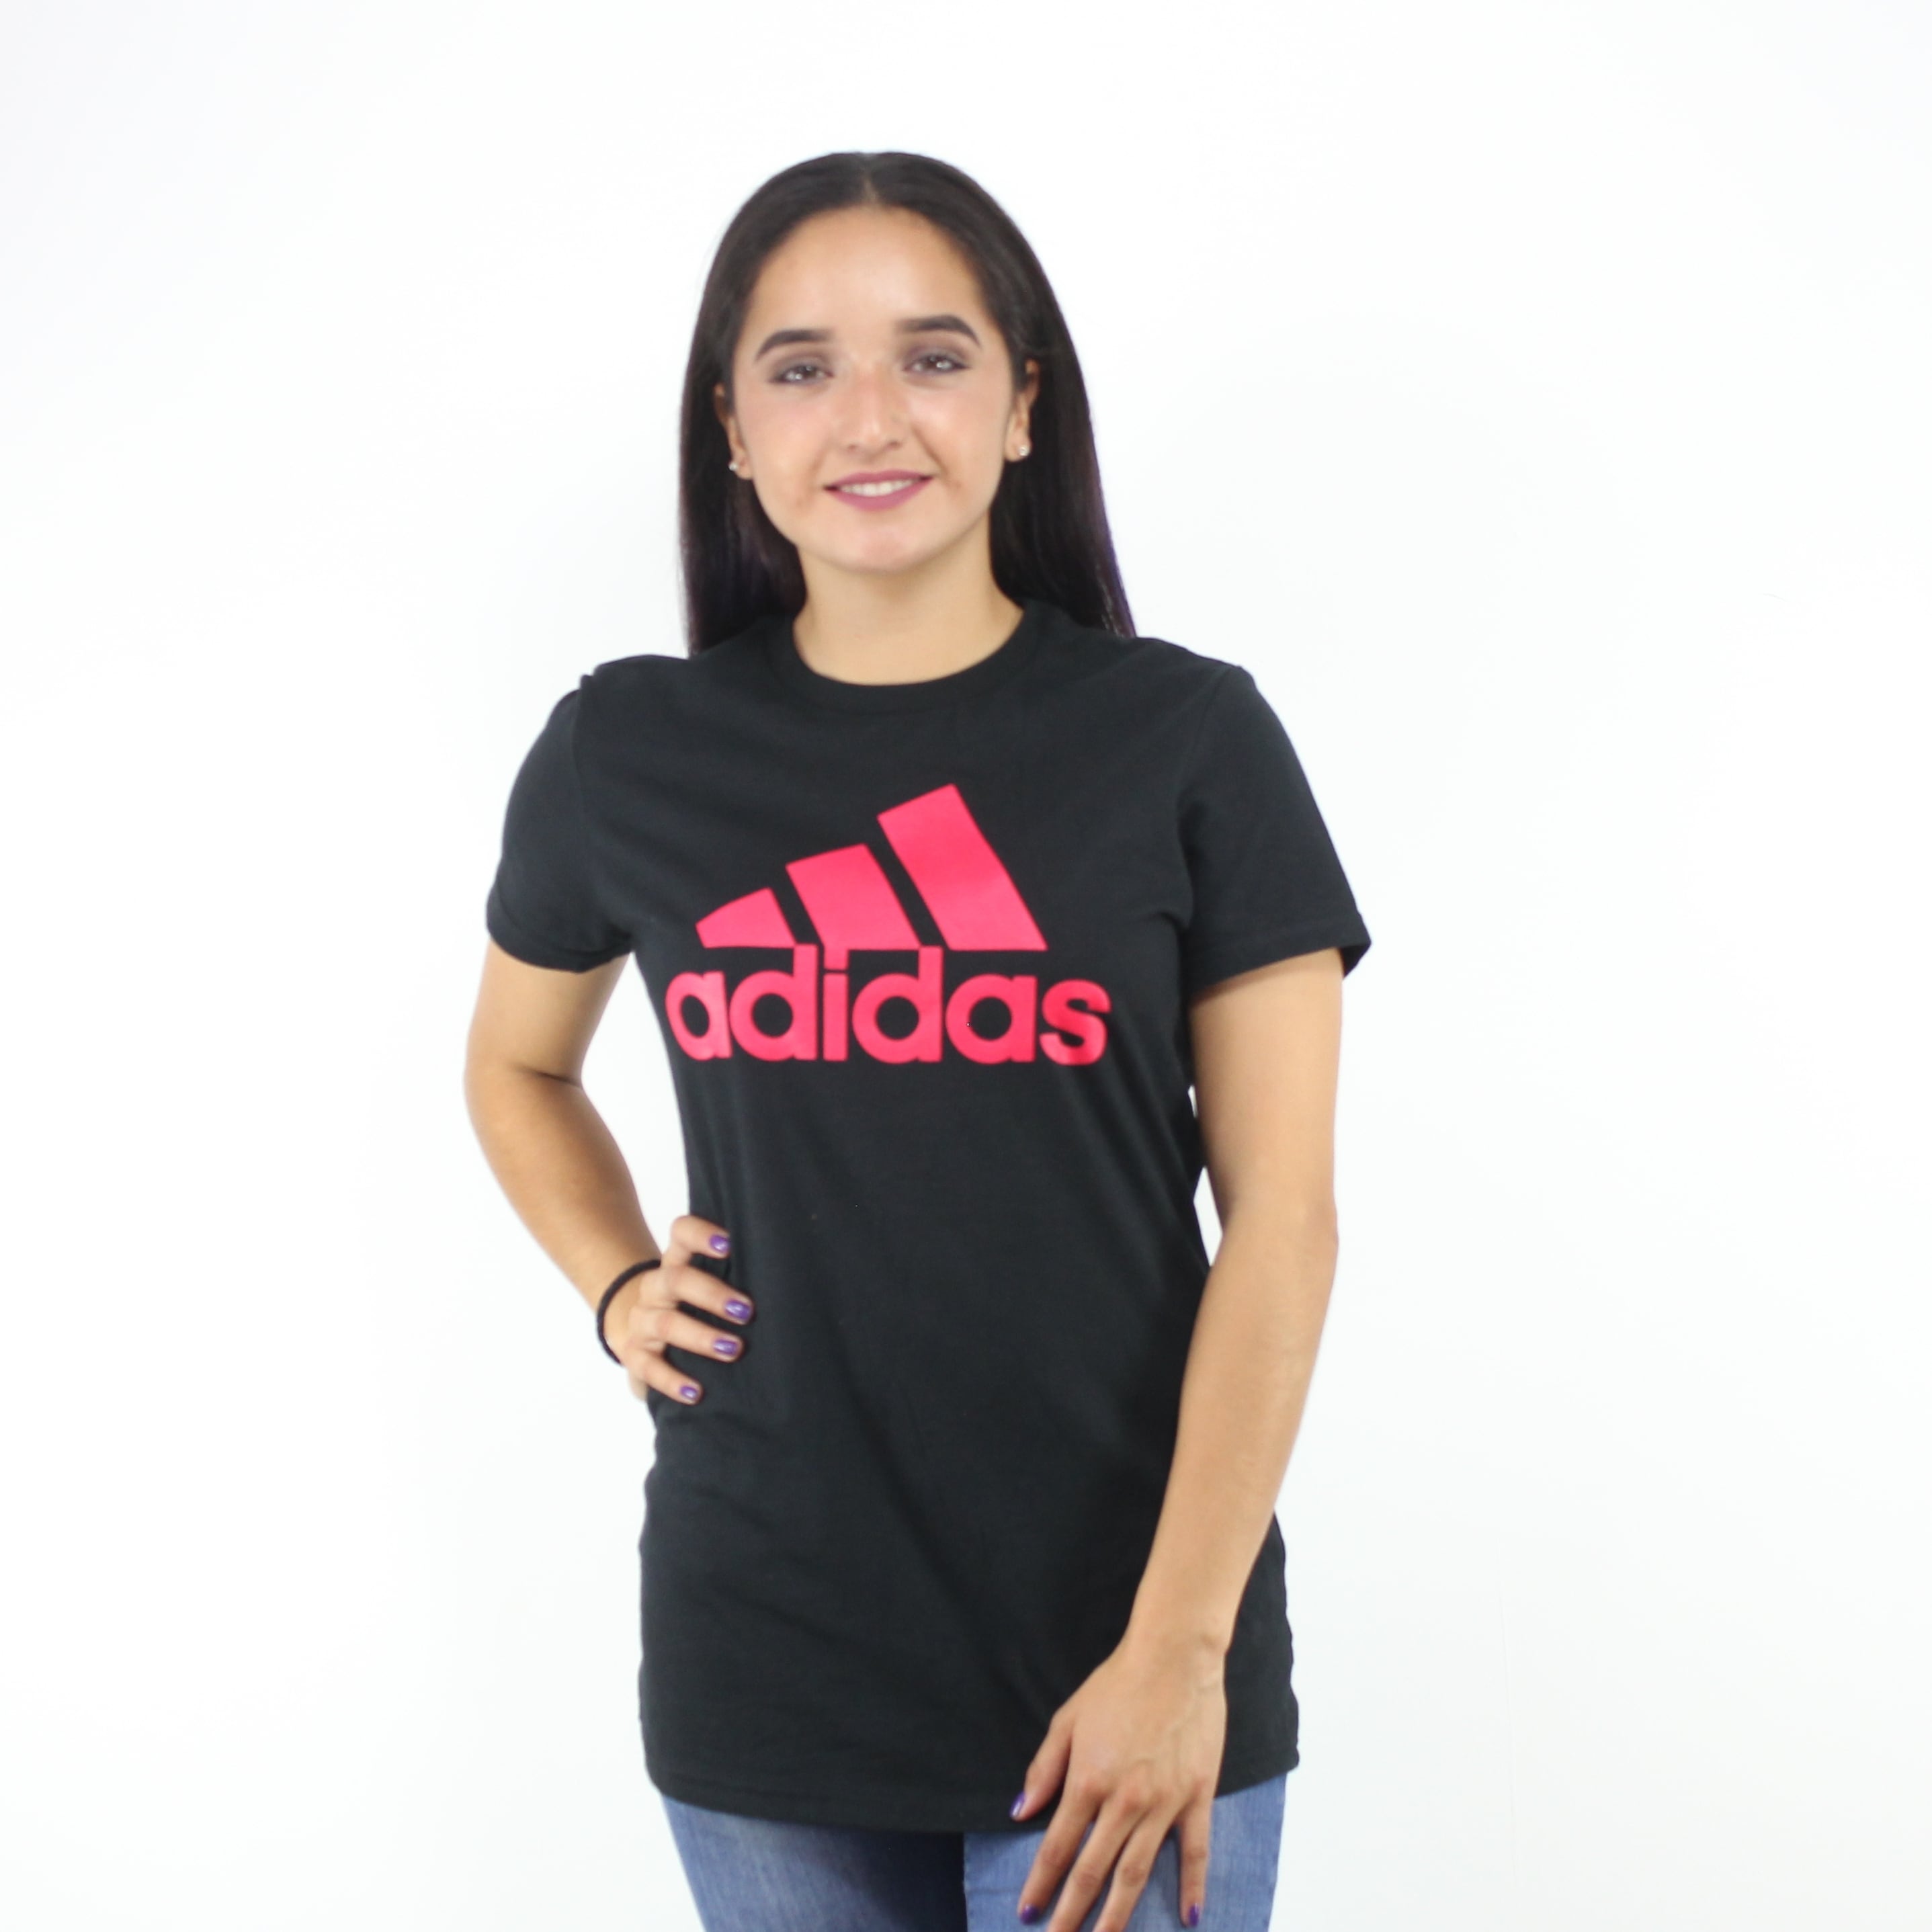 adidas red and black t shirt